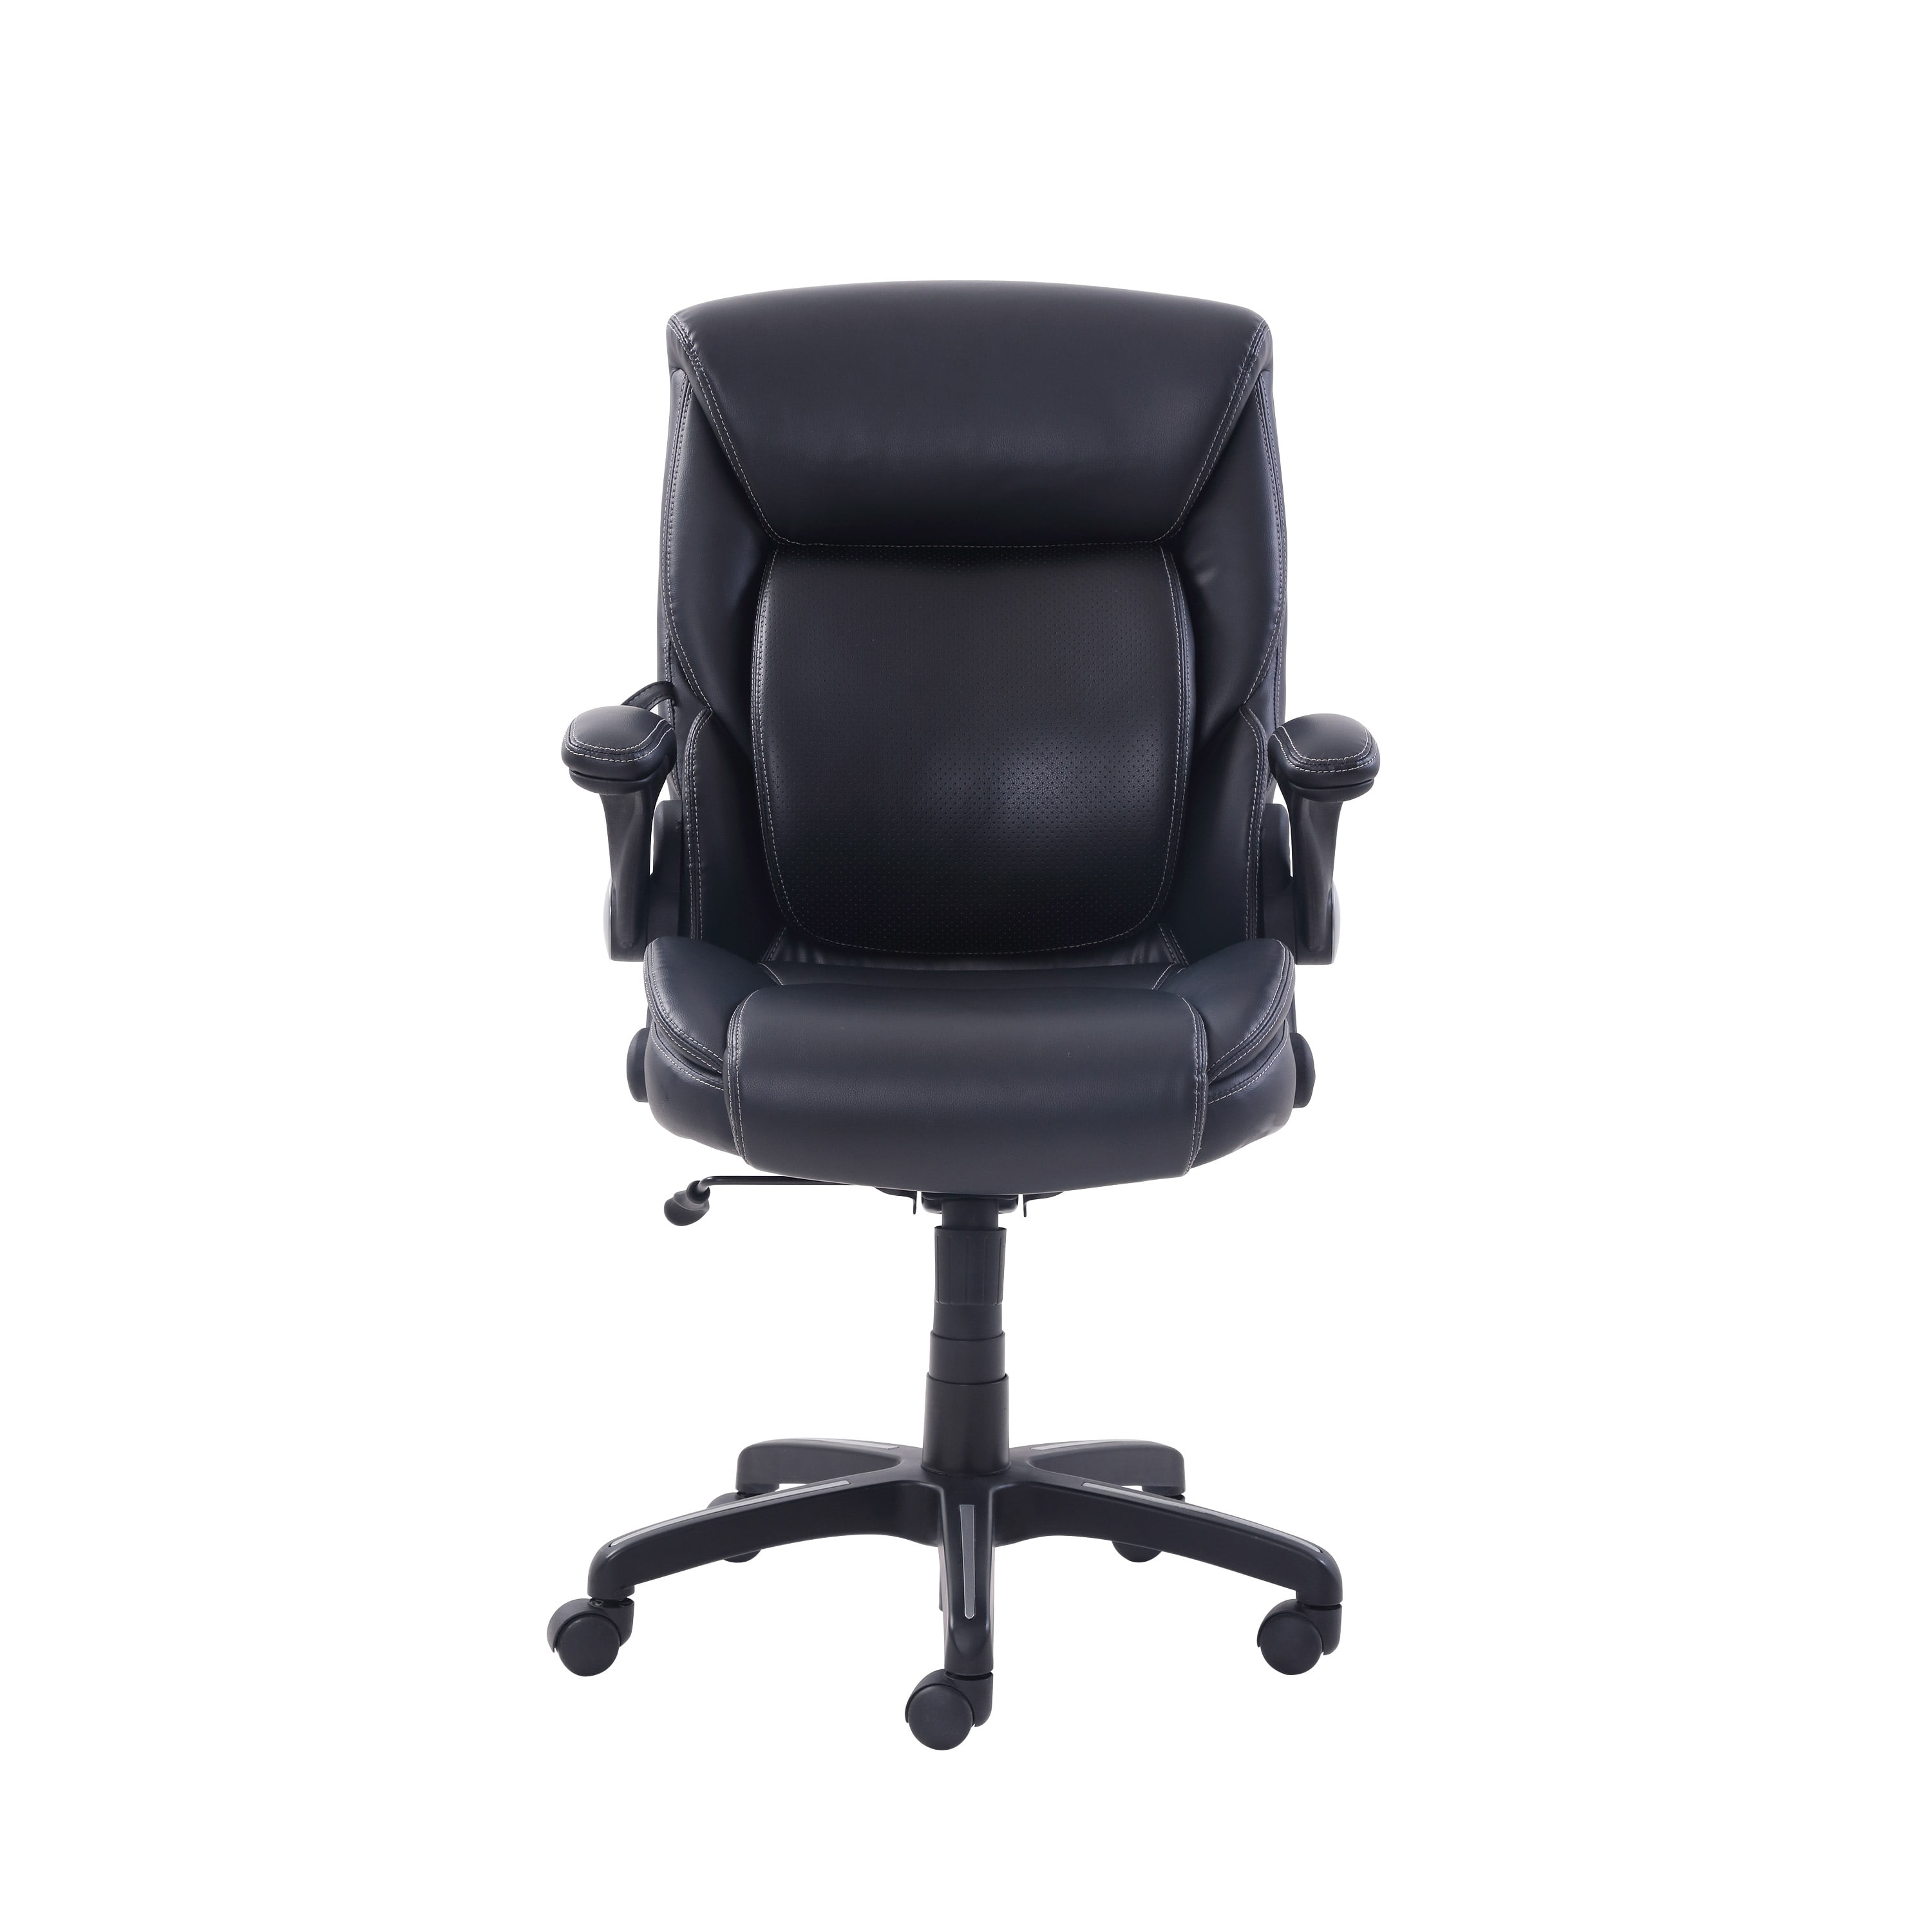 Serta Leather Manager's Office Computer Chair Black Free Shipping! NEW 